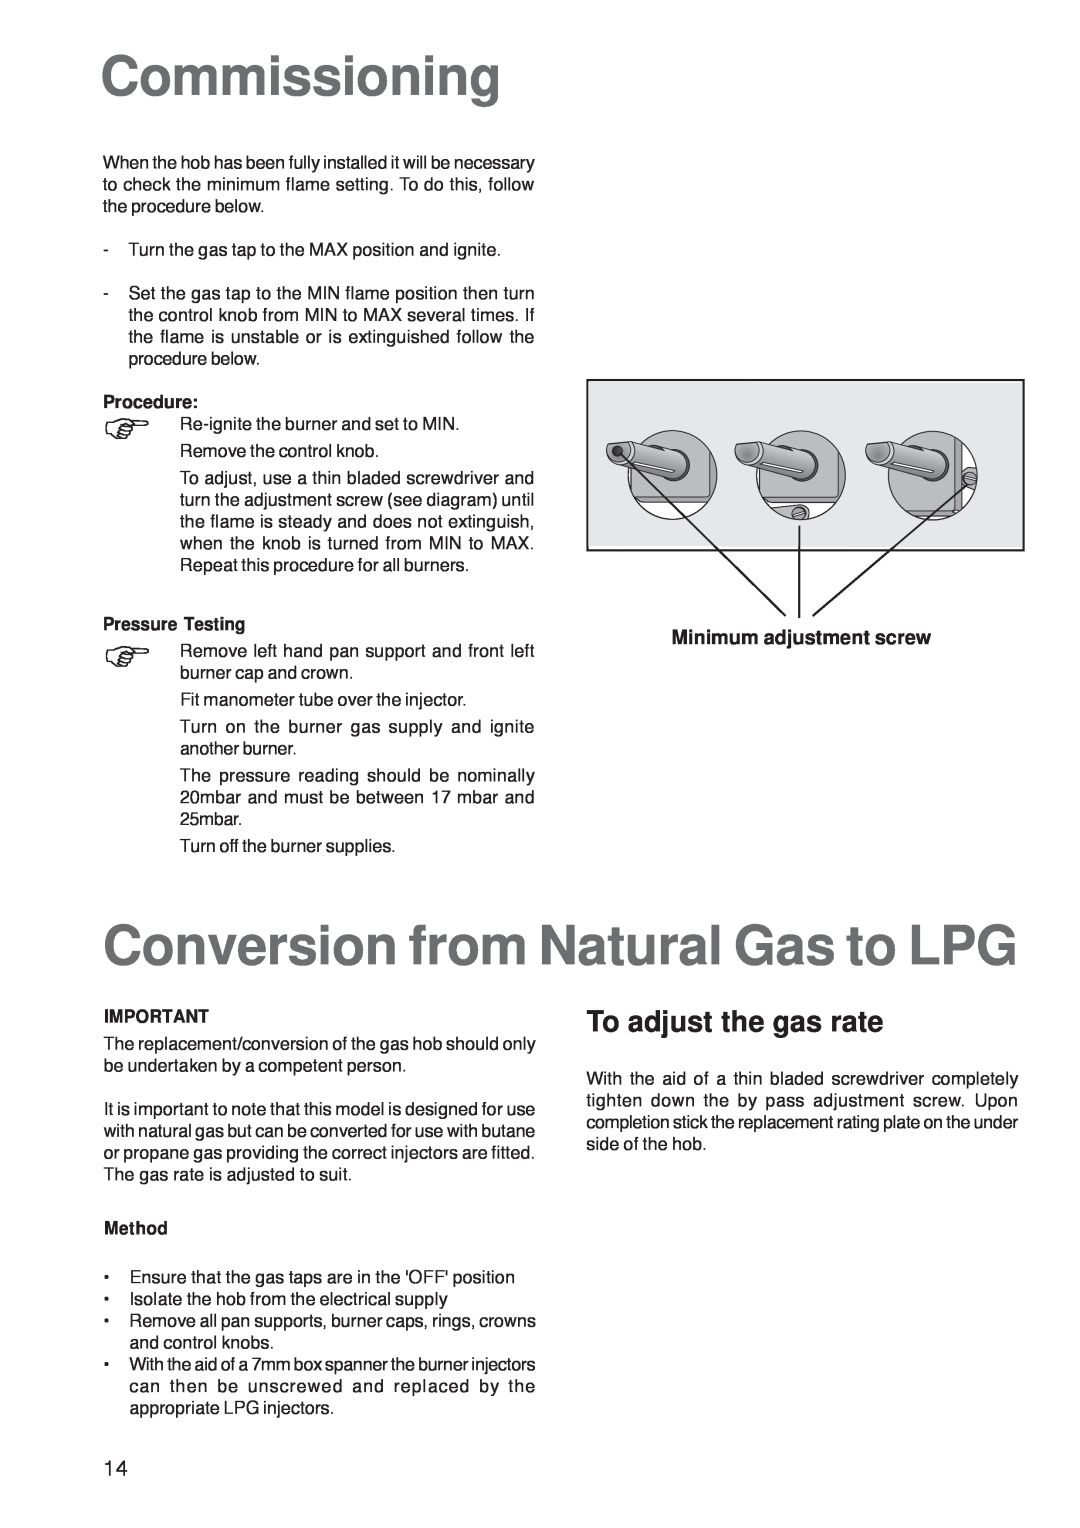 Zanussi ZGF 7820 manual Commissioning, Conversion from Natural Gas to LPG, To adjust the gas rate, Pressure Testing, Method 